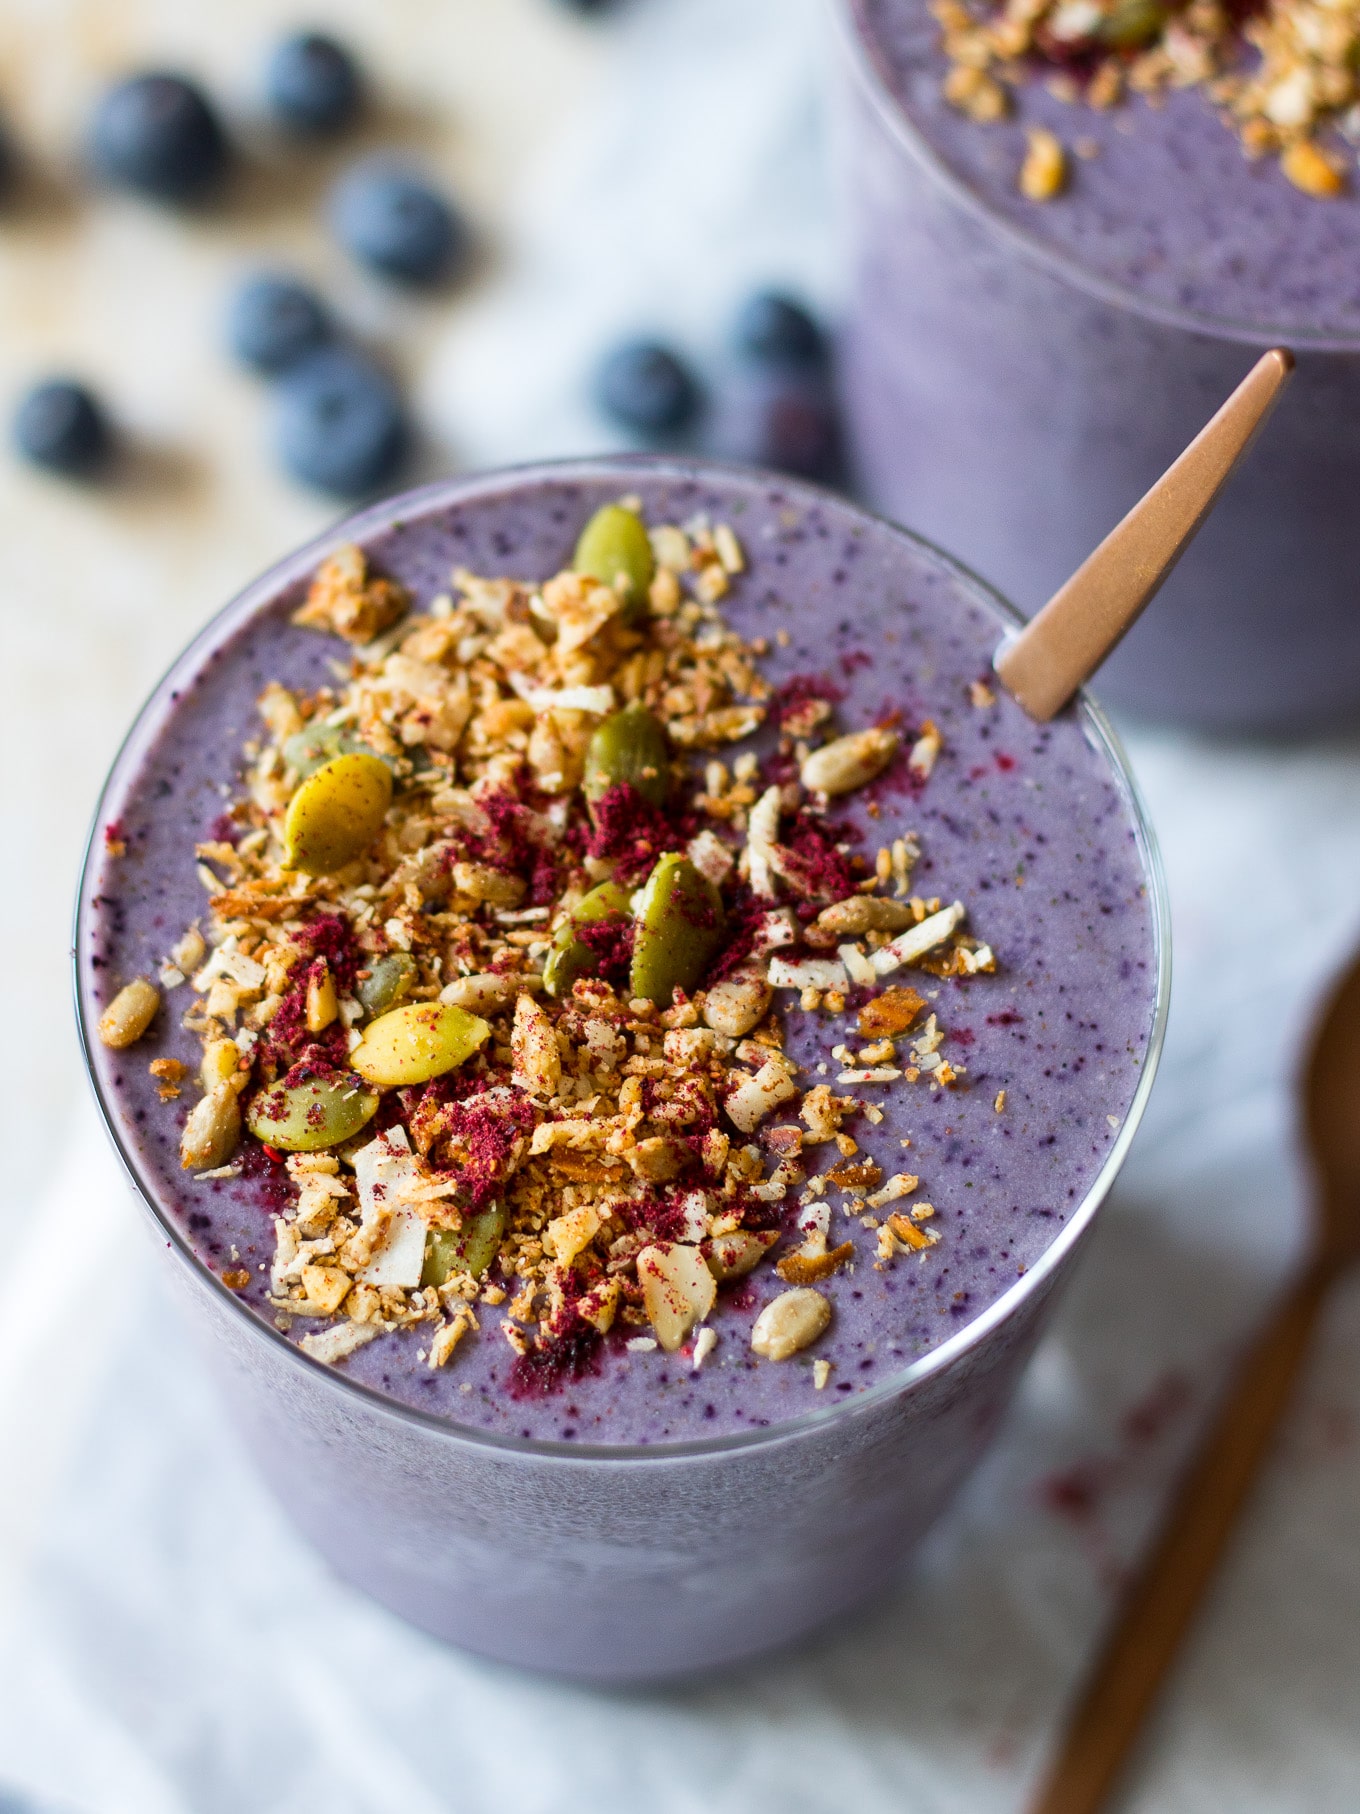 Blueberry Zucchini Protein Smoothie - made using frozen zucchini for a creamy but healthy thick smoothie! Gluten free, paleo friendly and with a vegan option too. #breakfastsmoothie #healthysnack #proteinsmoothie